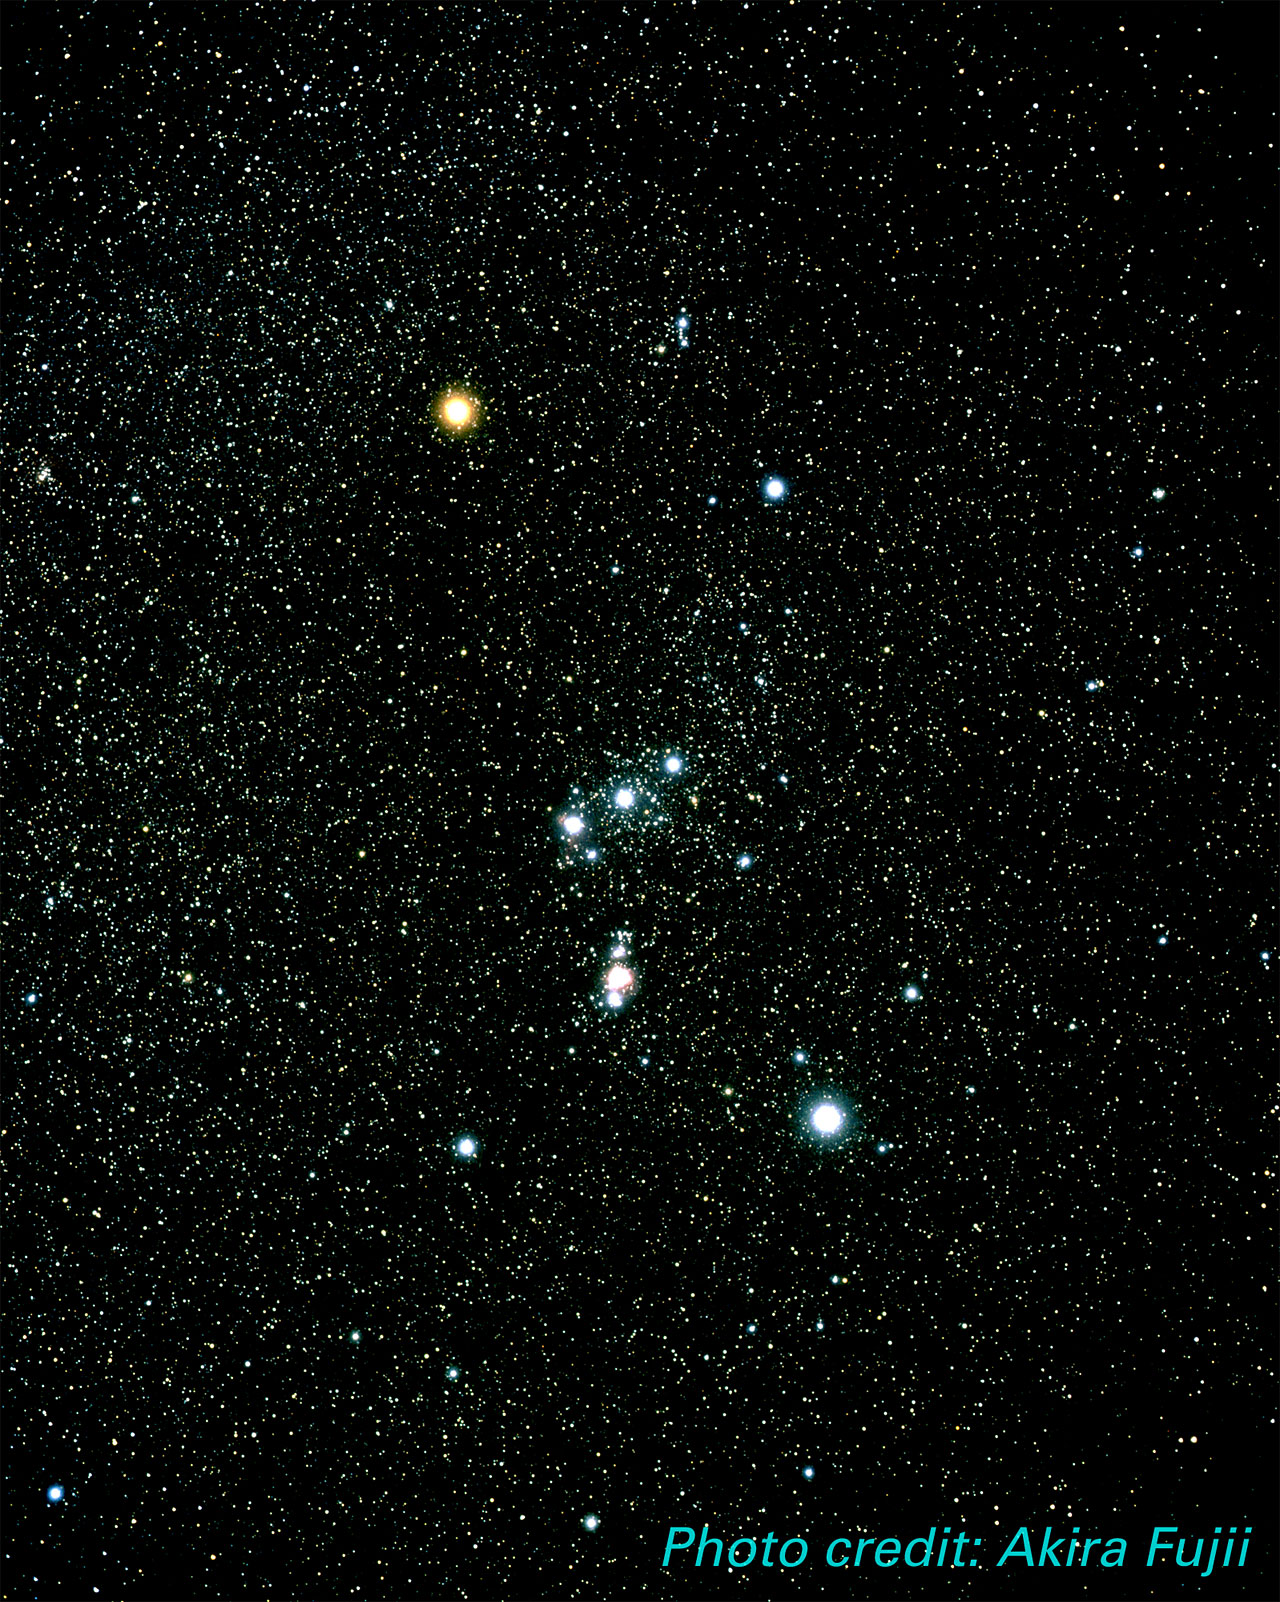 http://www.spacetelescope.org/static/archives/images/screen/opo0205b.jpg